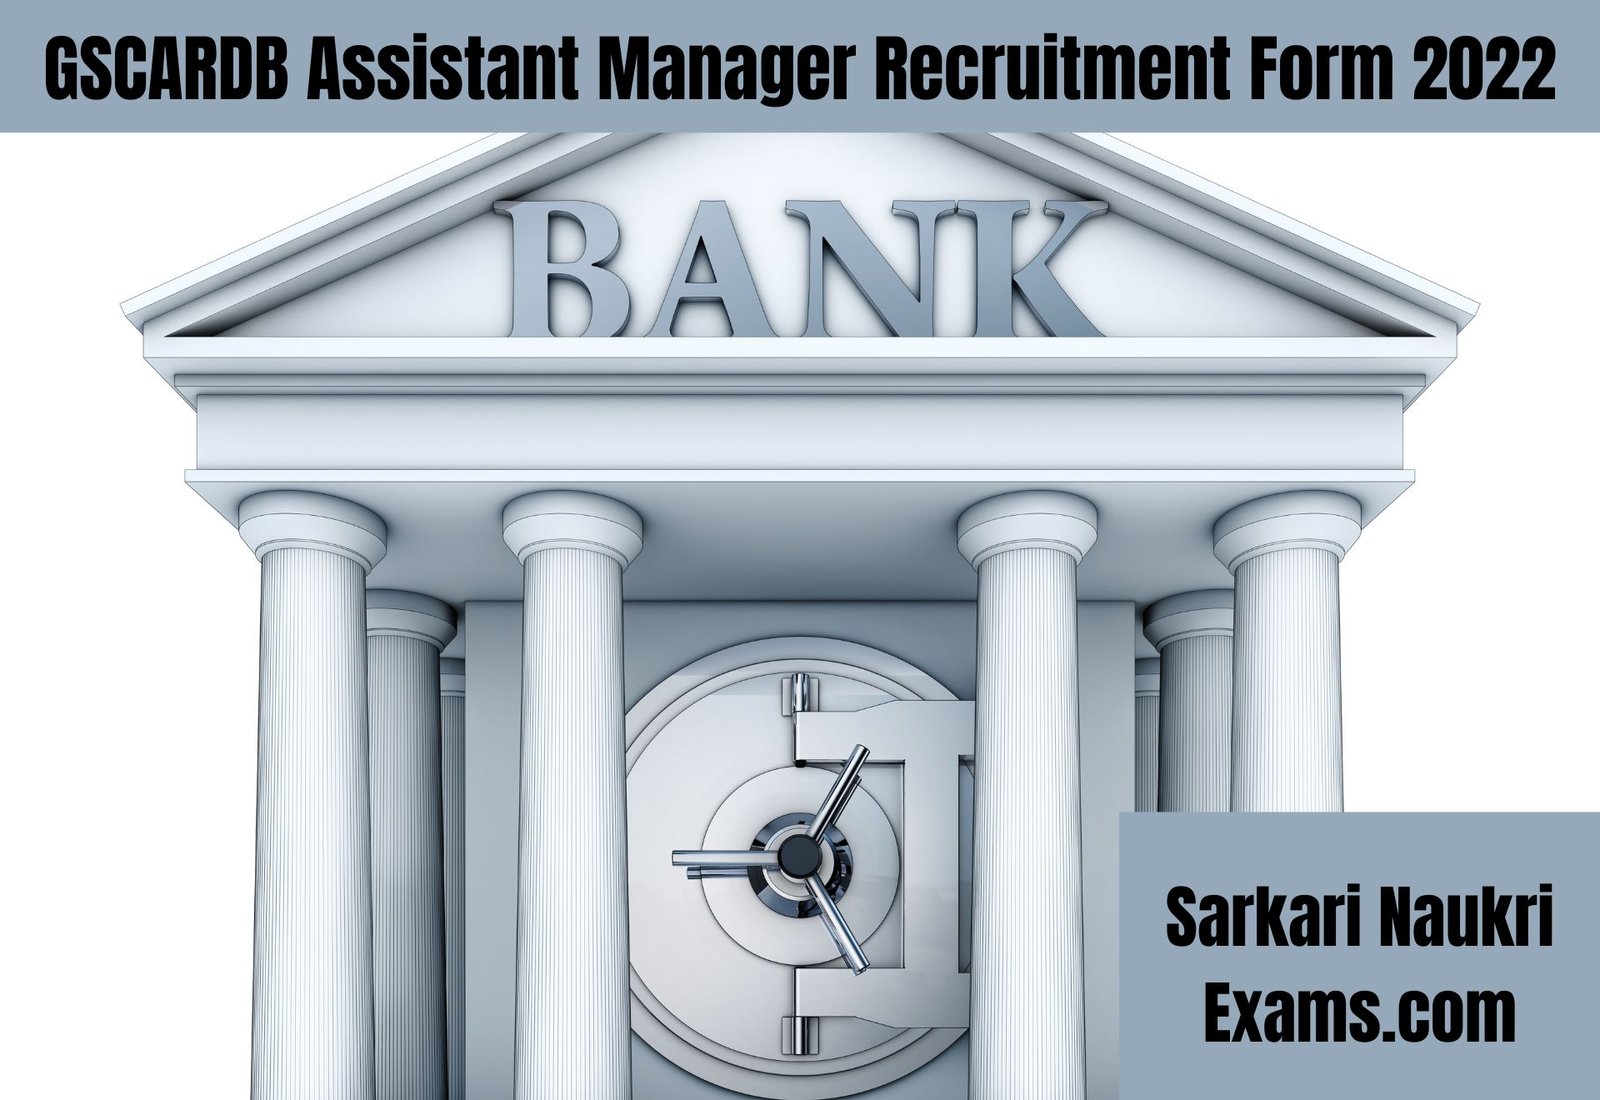 GSCARDB Assistant Manager Recruitment Form 2022 | Banking Job | Interview Based Job